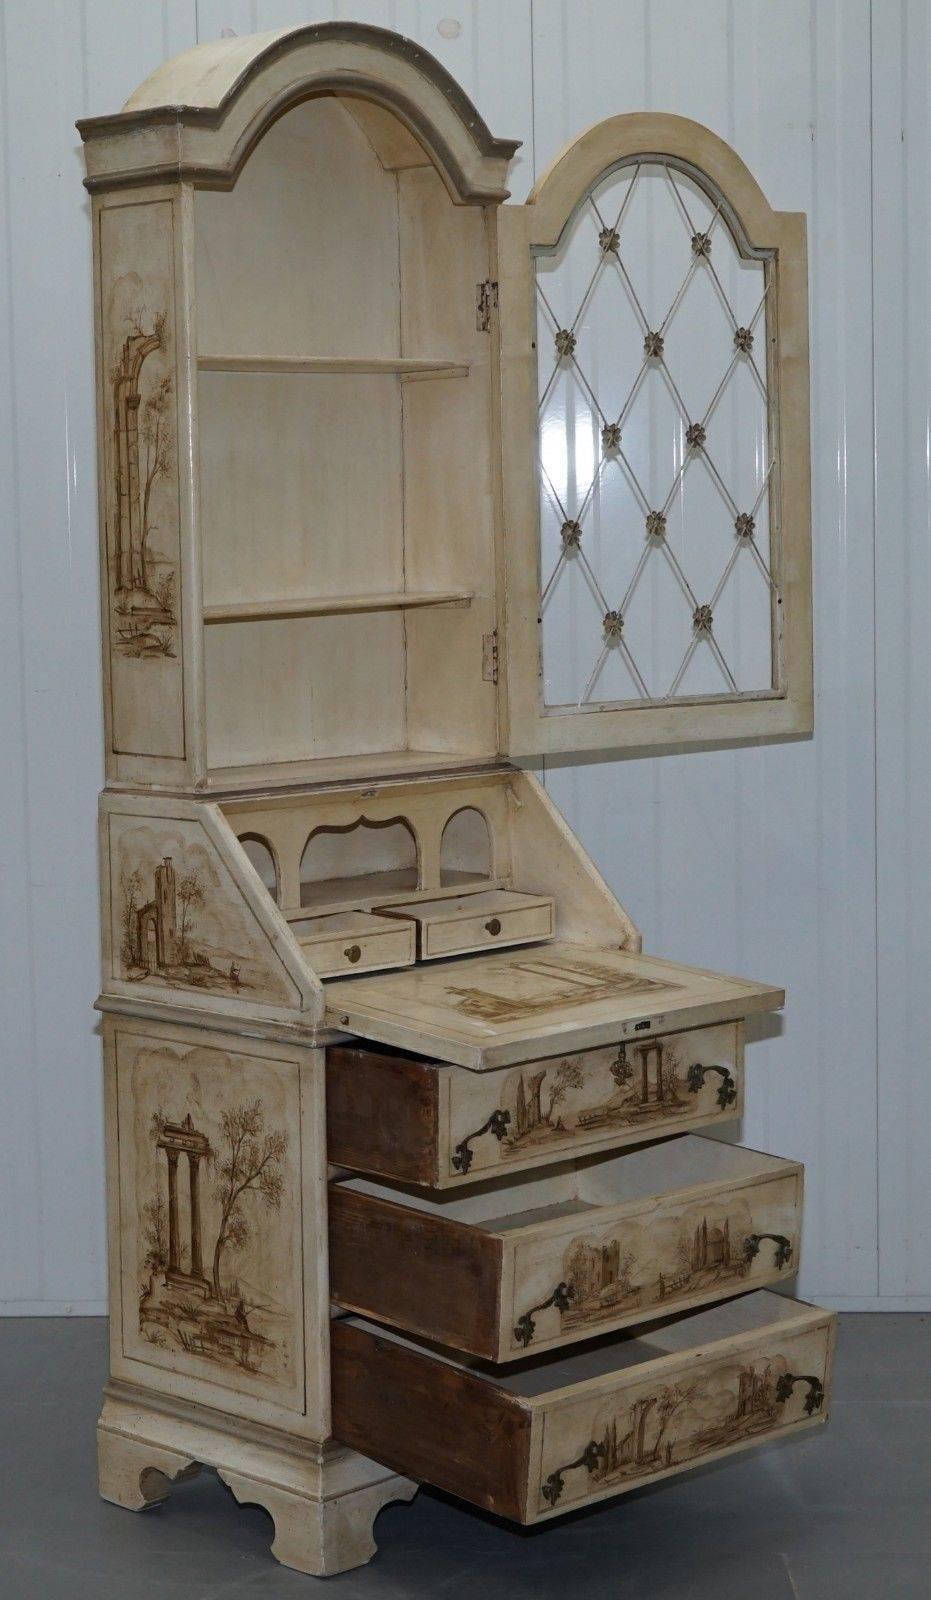 Hand-Crafted Vintage French Shabby Chic Style Hand-Painted Bureau Bookcase Cabinet Desk